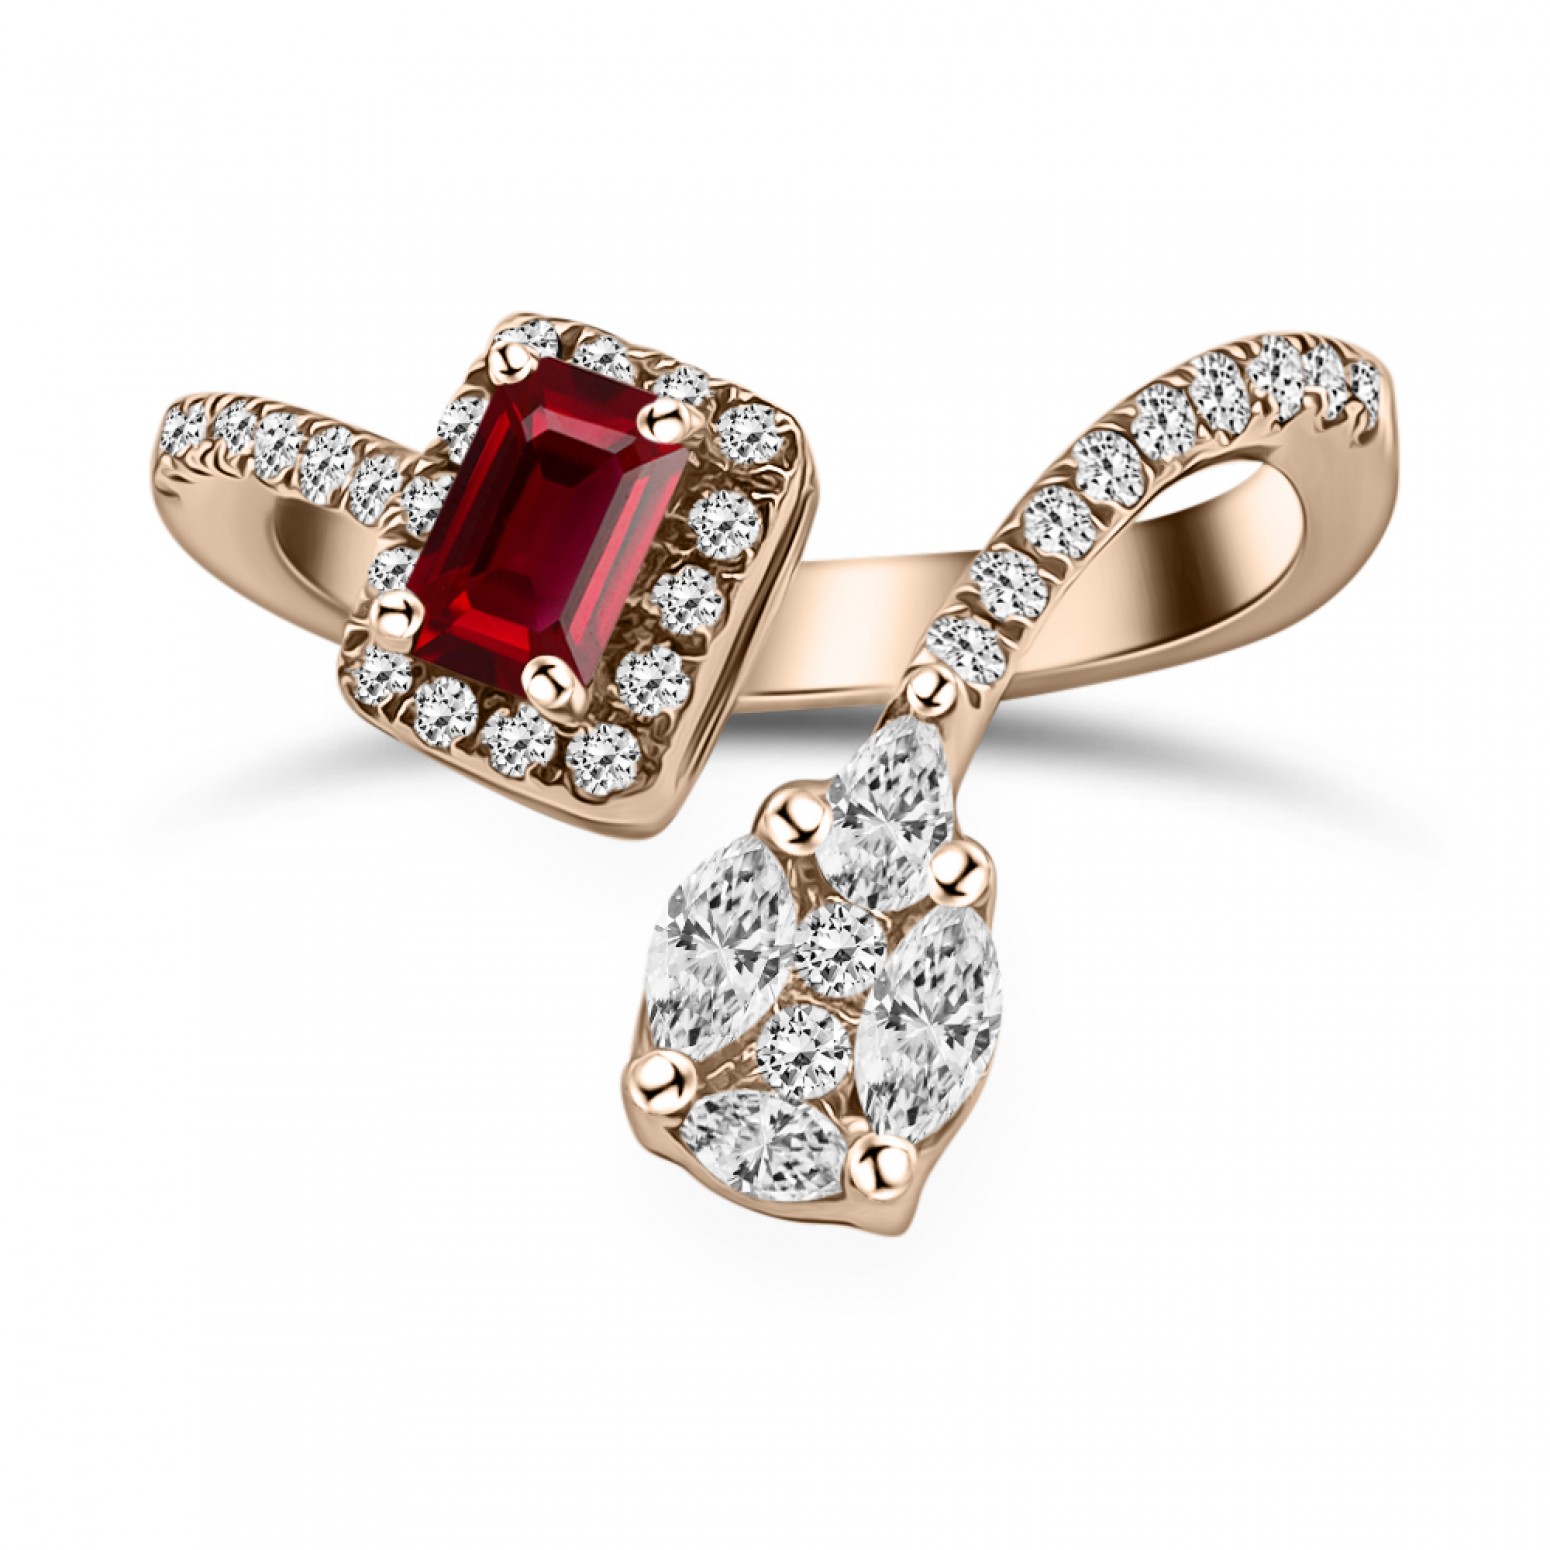 Solitaire ring 18K pink gold with ruby 0.32ct and diamonds 0.47ct, VS1, G da4206 ENGAGEMENT RINGS Κοσμηματα - chrilia.gr